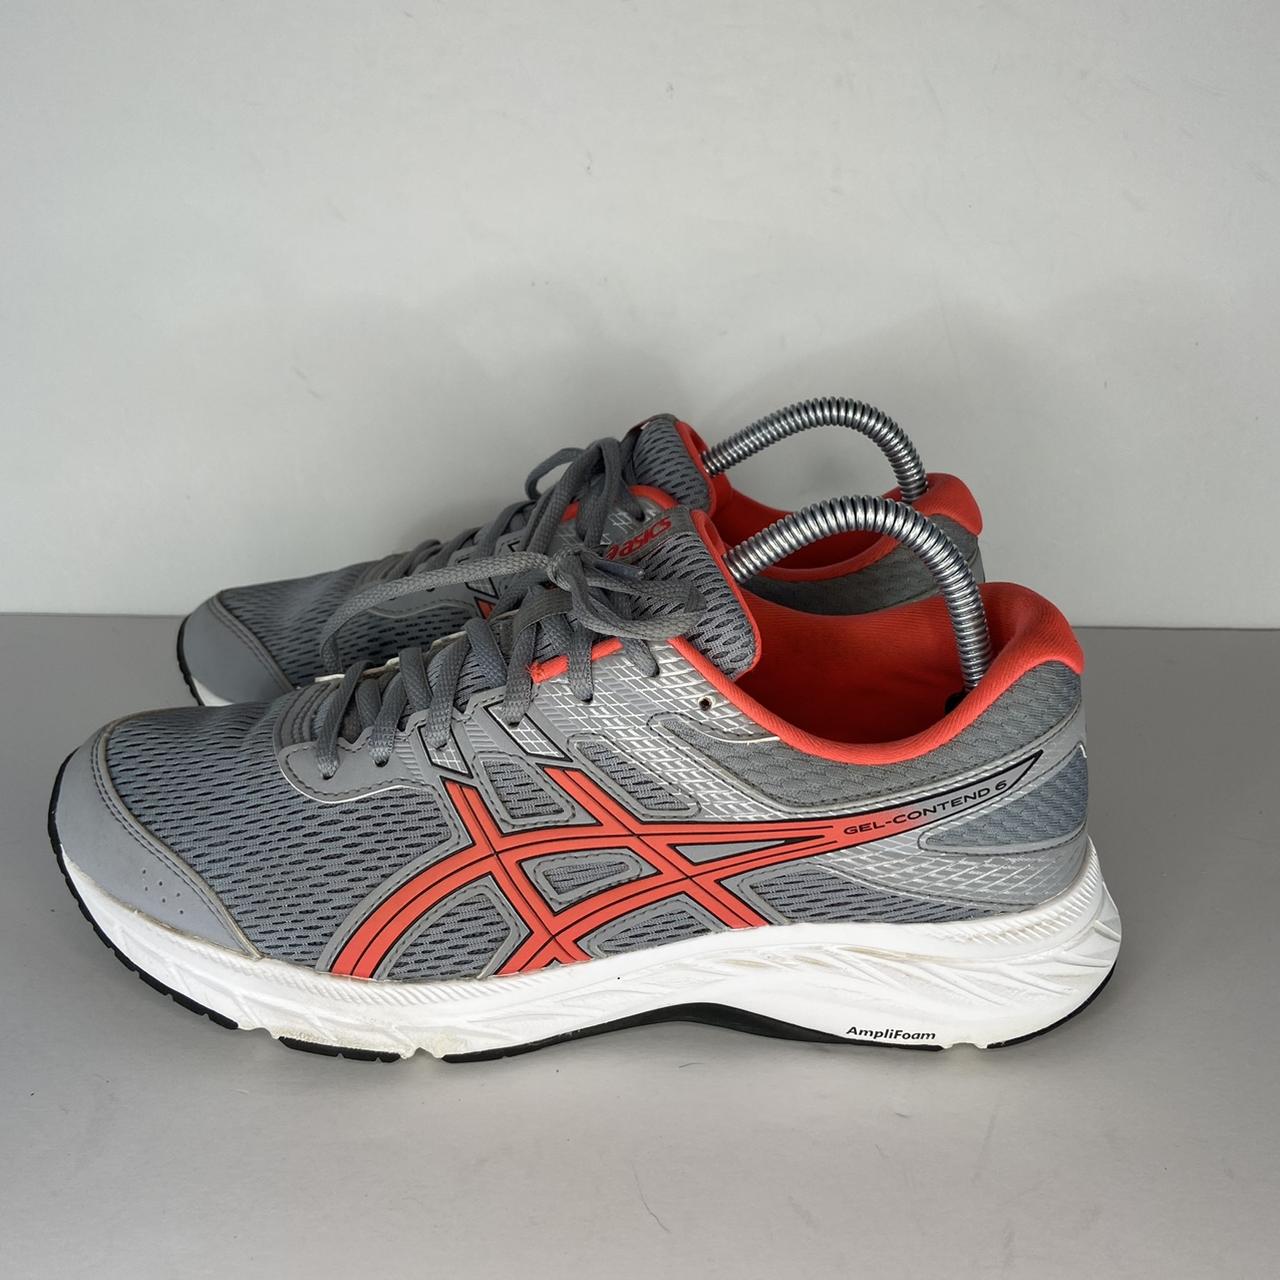 Product Image 1 - ASICS gel contend 6 sneakers.